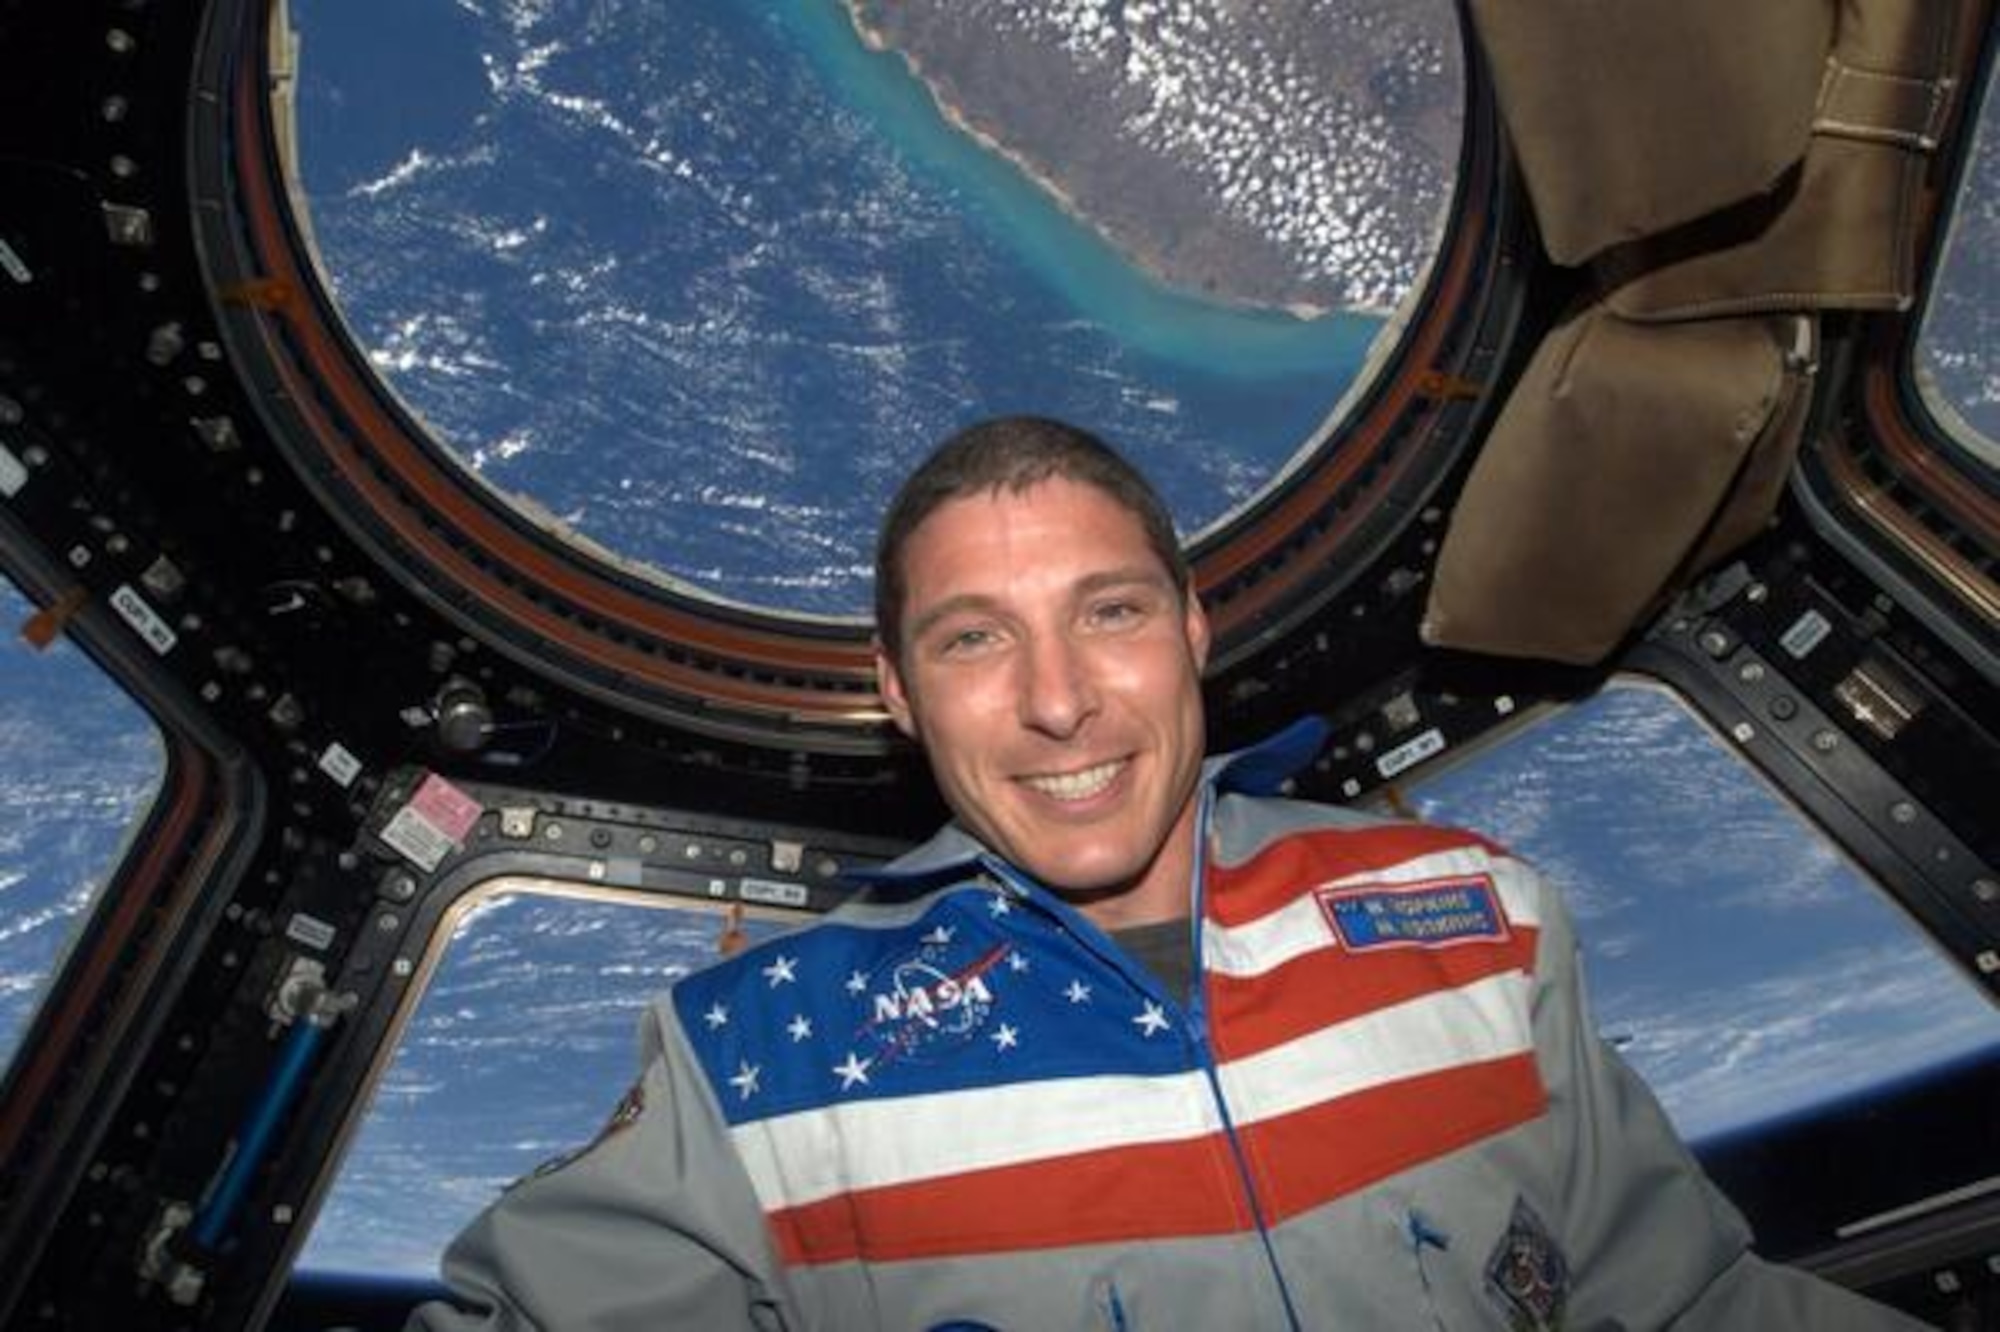 Astronaut Col. Michael Hopkins during his first mission to the International Space Station in 2013.